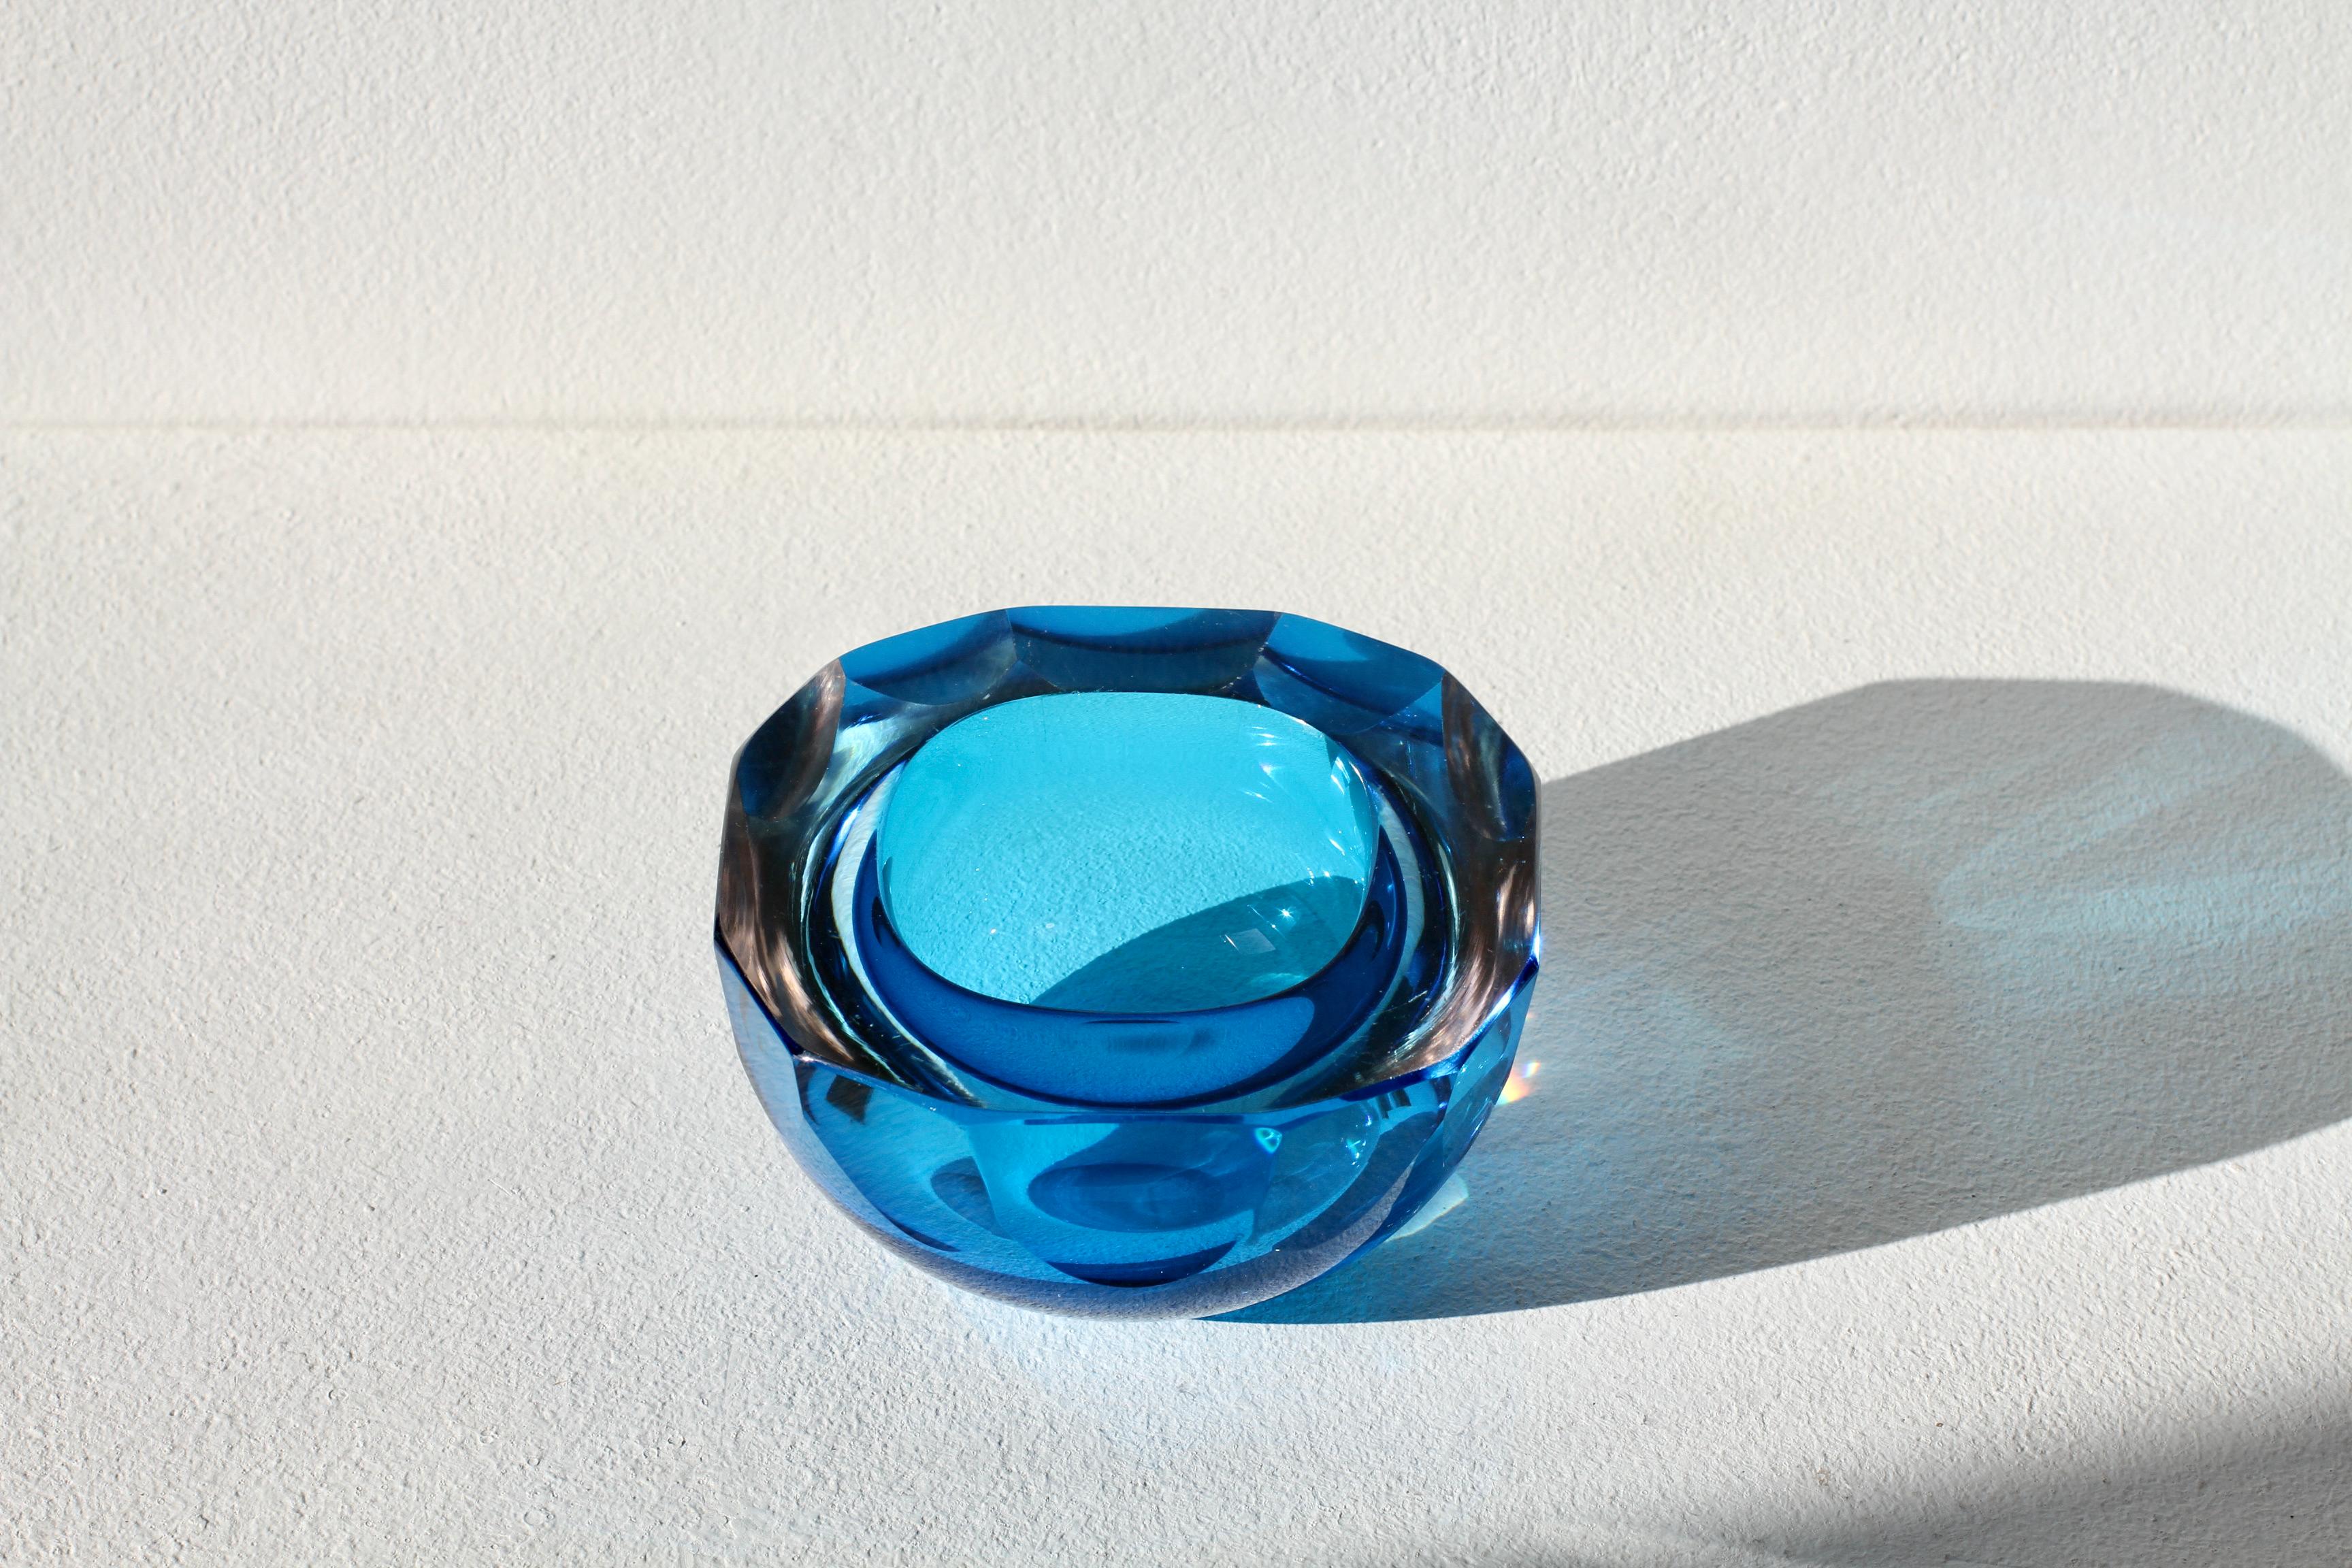 Faceted Blue Murano Midcentury Modern 1960s Sommerso Diamond Cut Glass Bowl For Sale 7